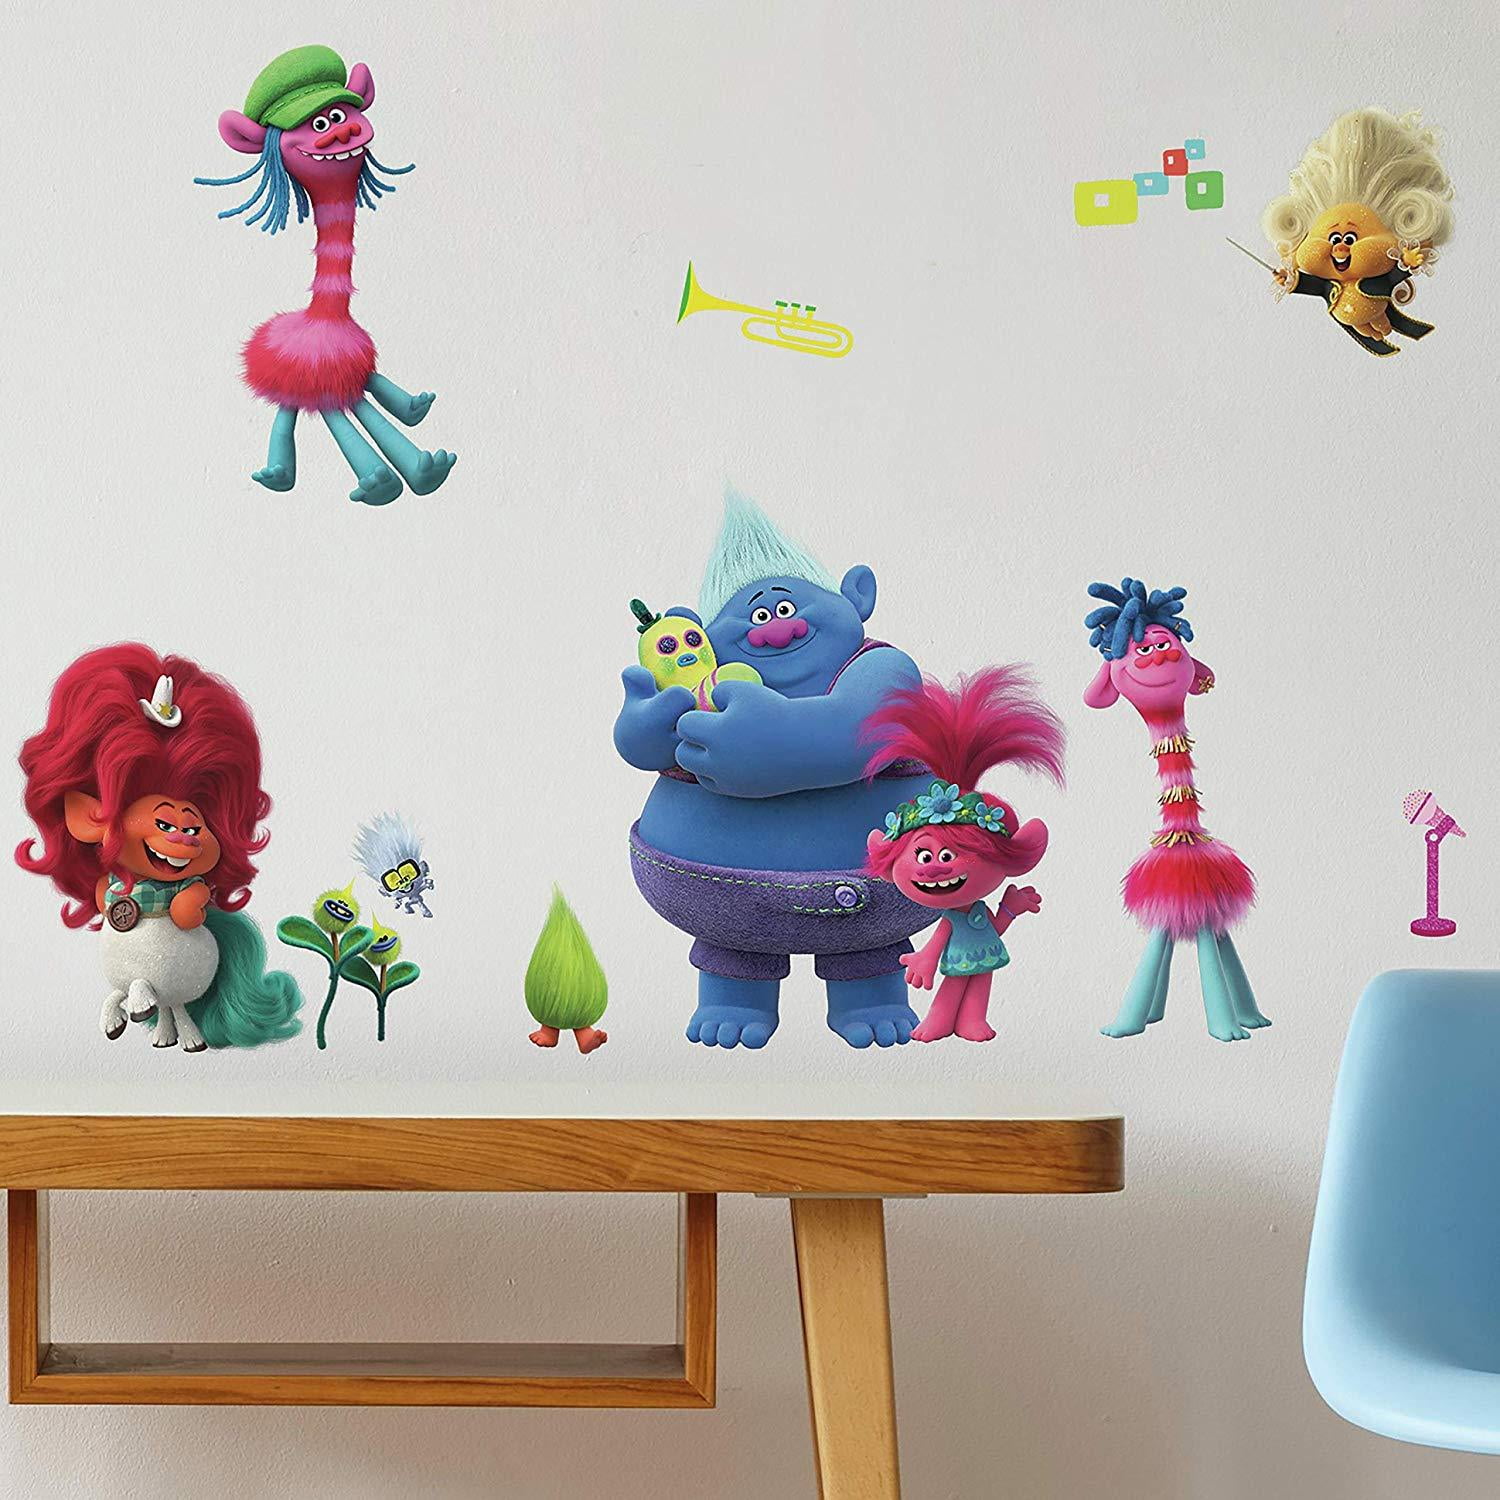 Details about   Roommates TROLLS MOVIE 24 Glittery Decals Poppy Branch Bergens Wall Stickers New 